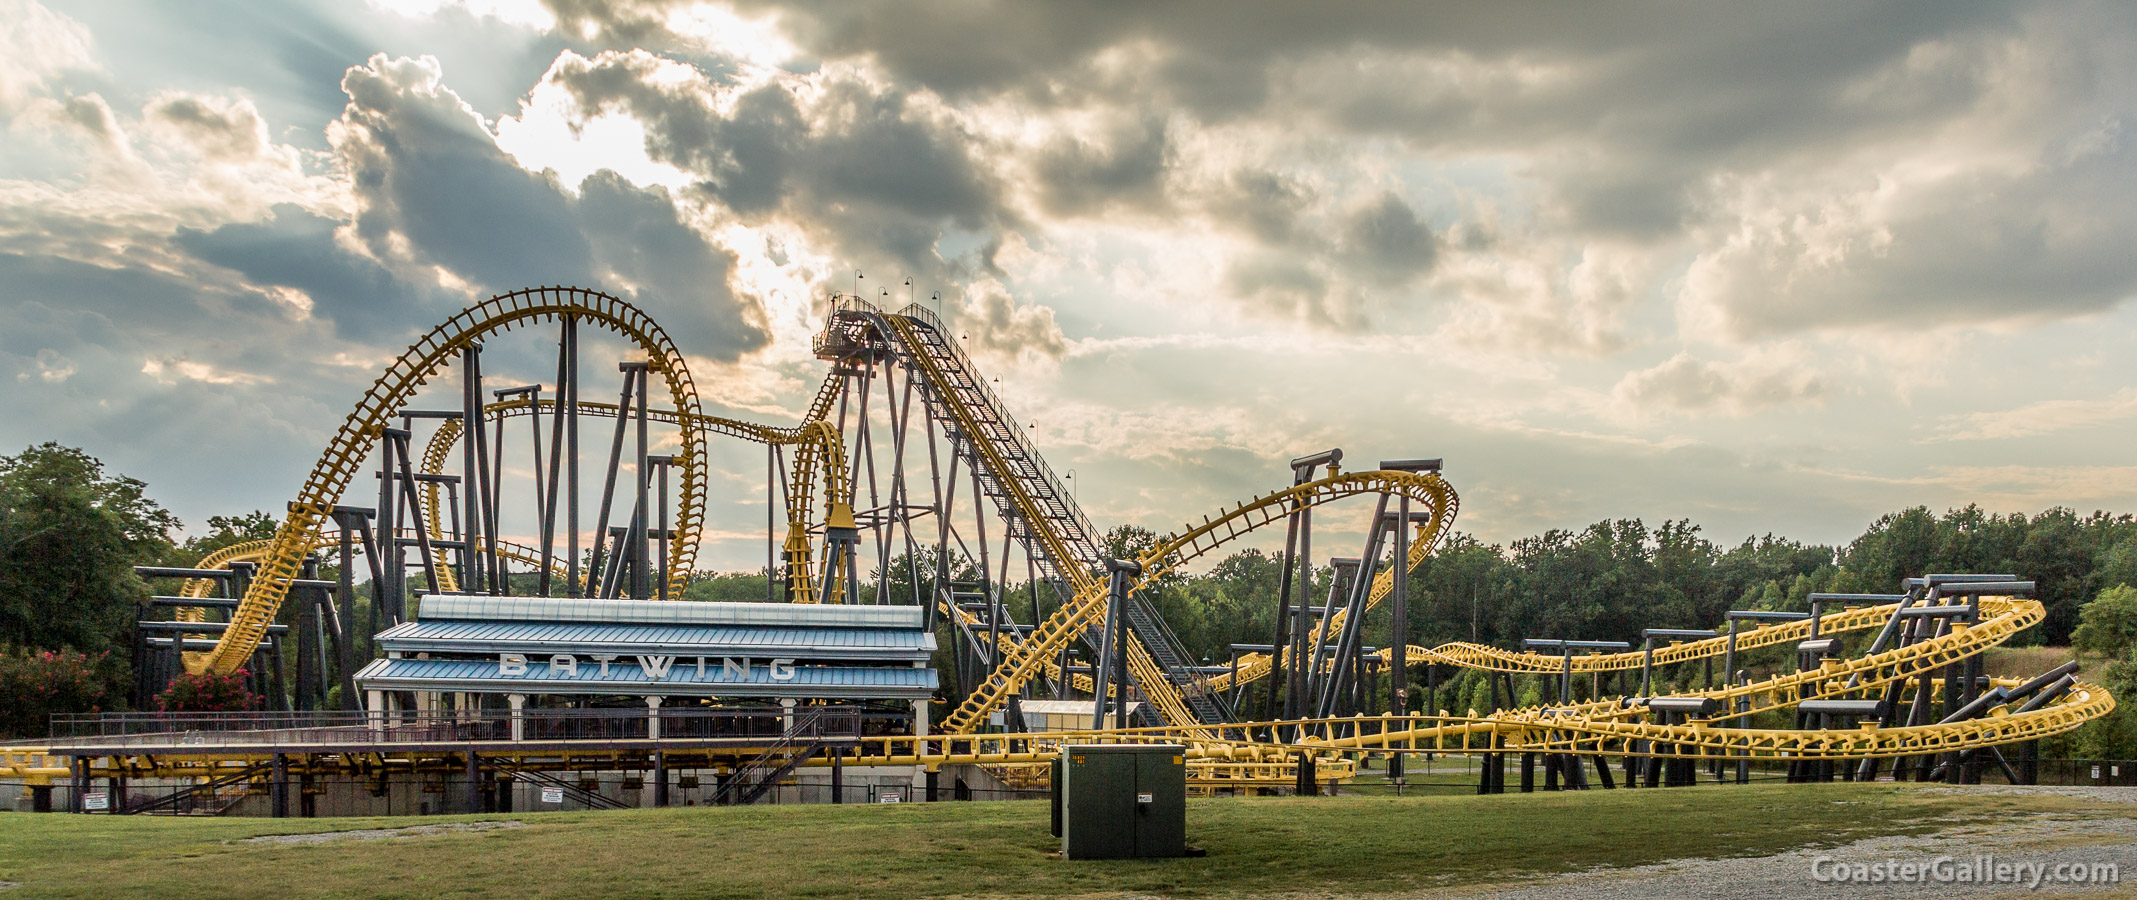 Panorama of a flying roller coaster at sunset